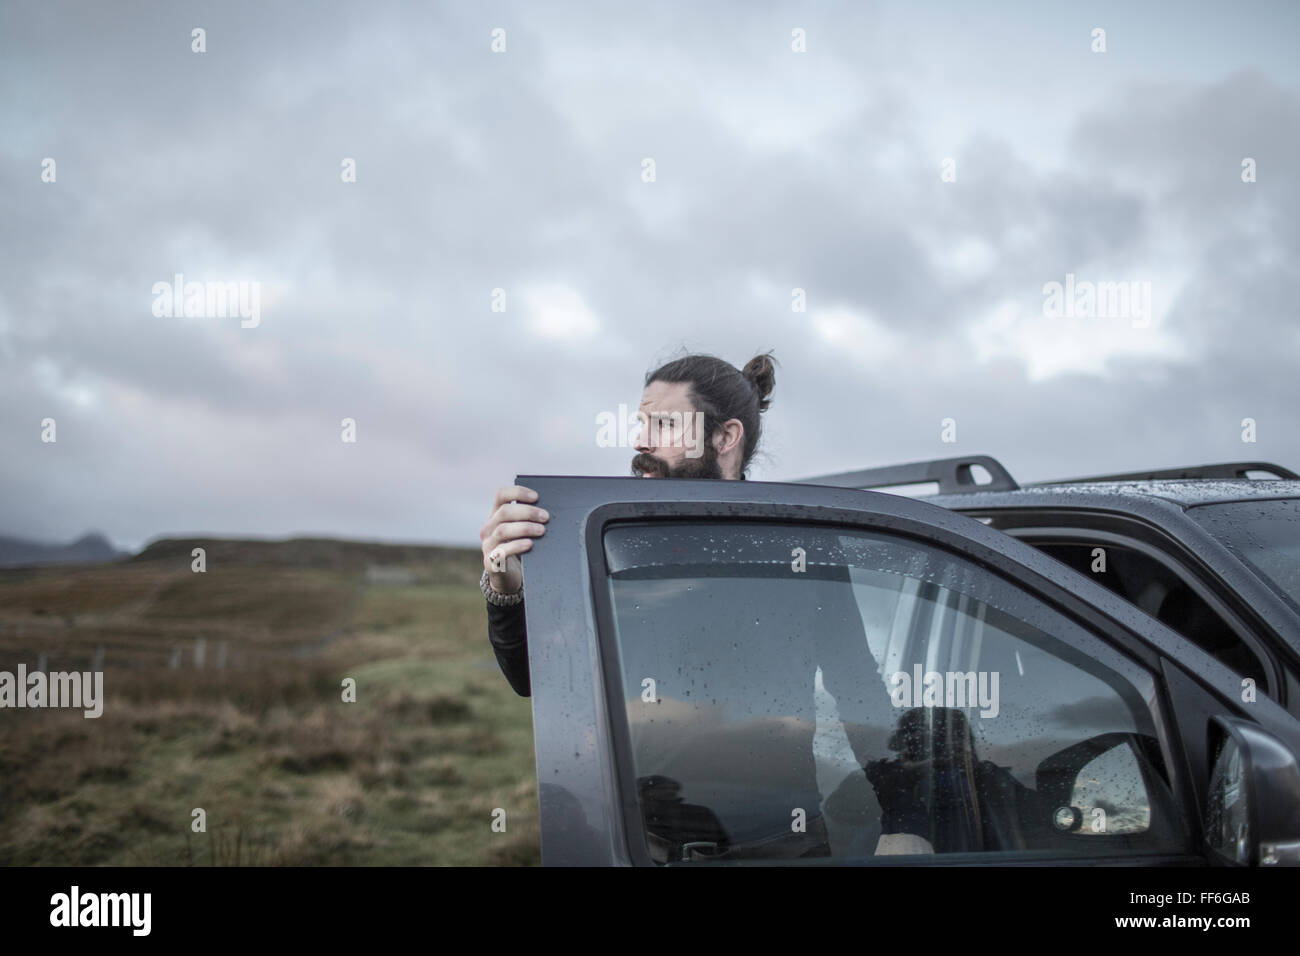 A man standing by an open car door, looking around him, under a cloudy wintery sky. Stock Photo